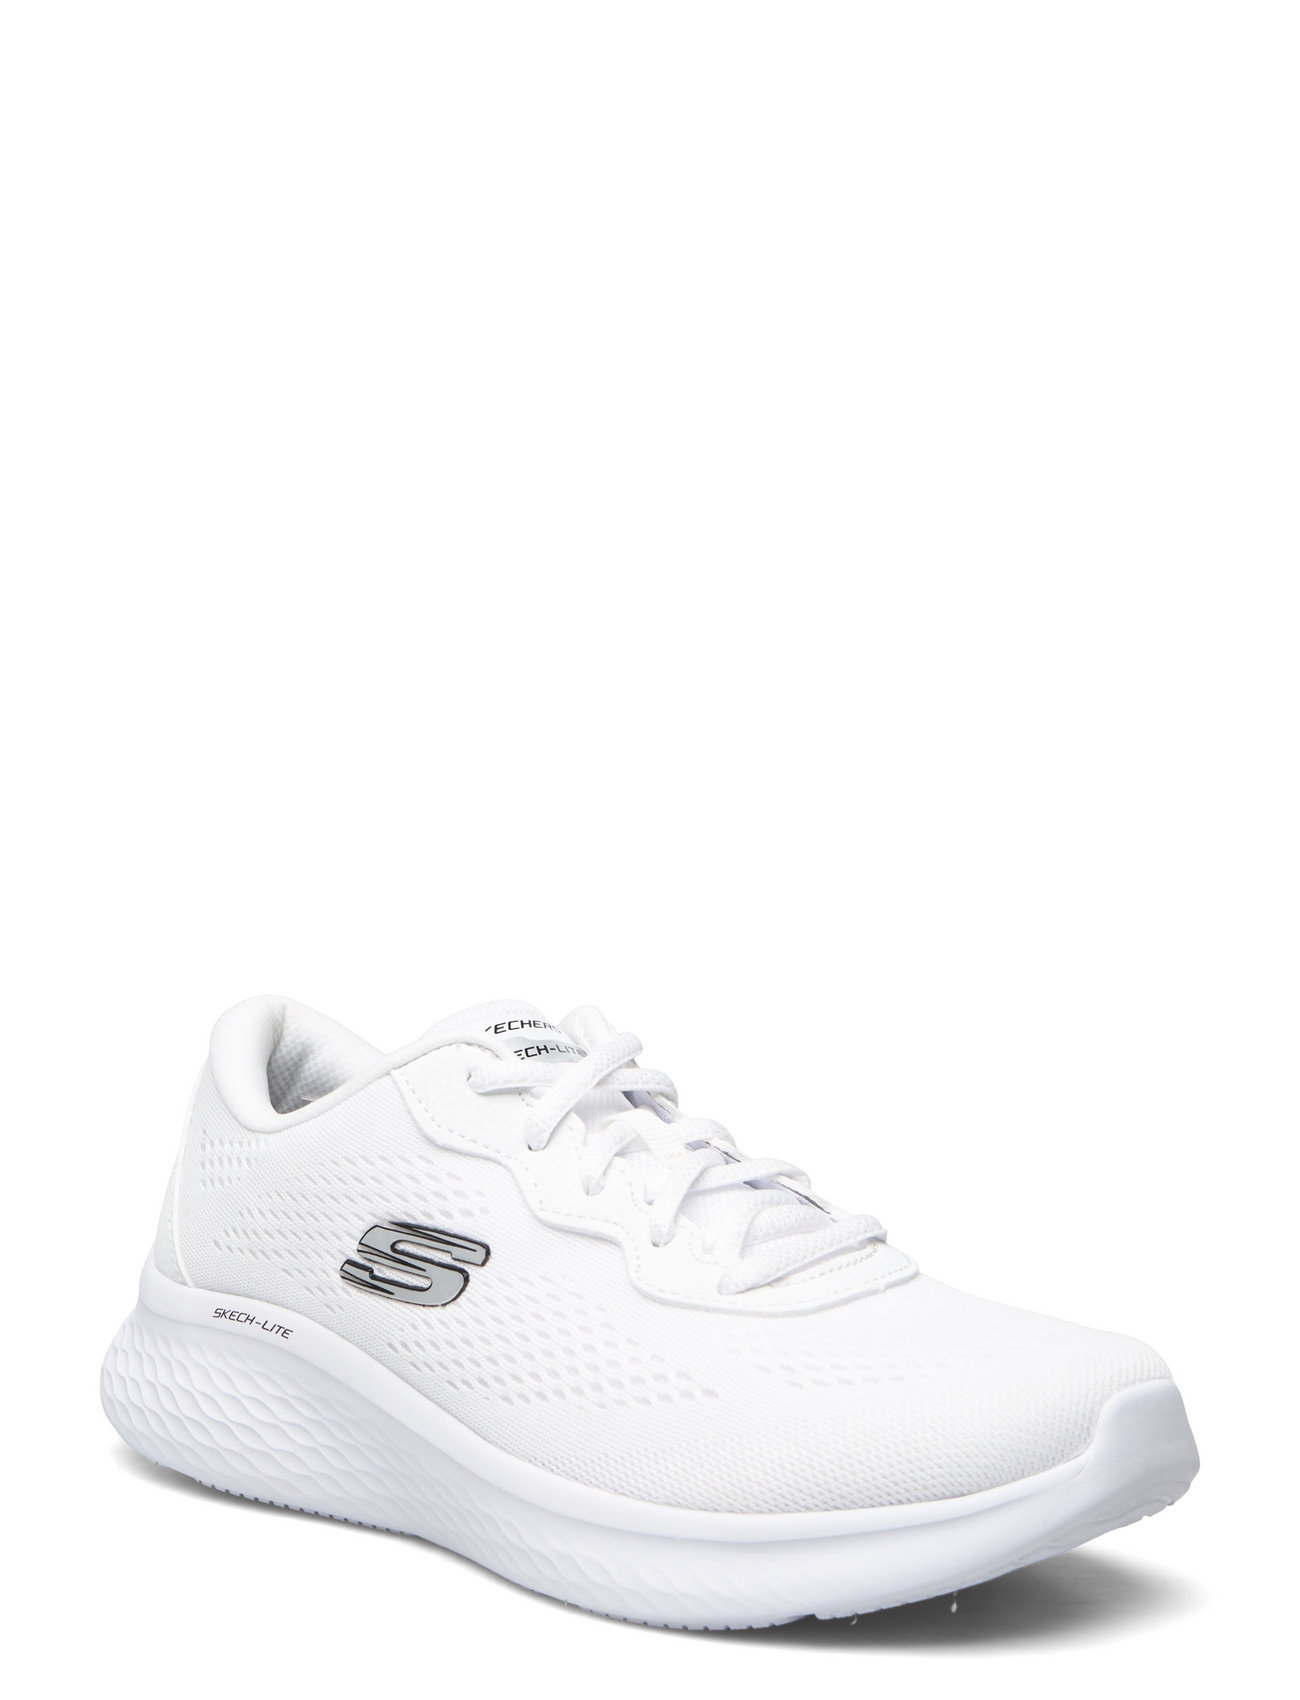 Skechers Womens Skech-lite Pro - Perfect Time - Low top sneakers 